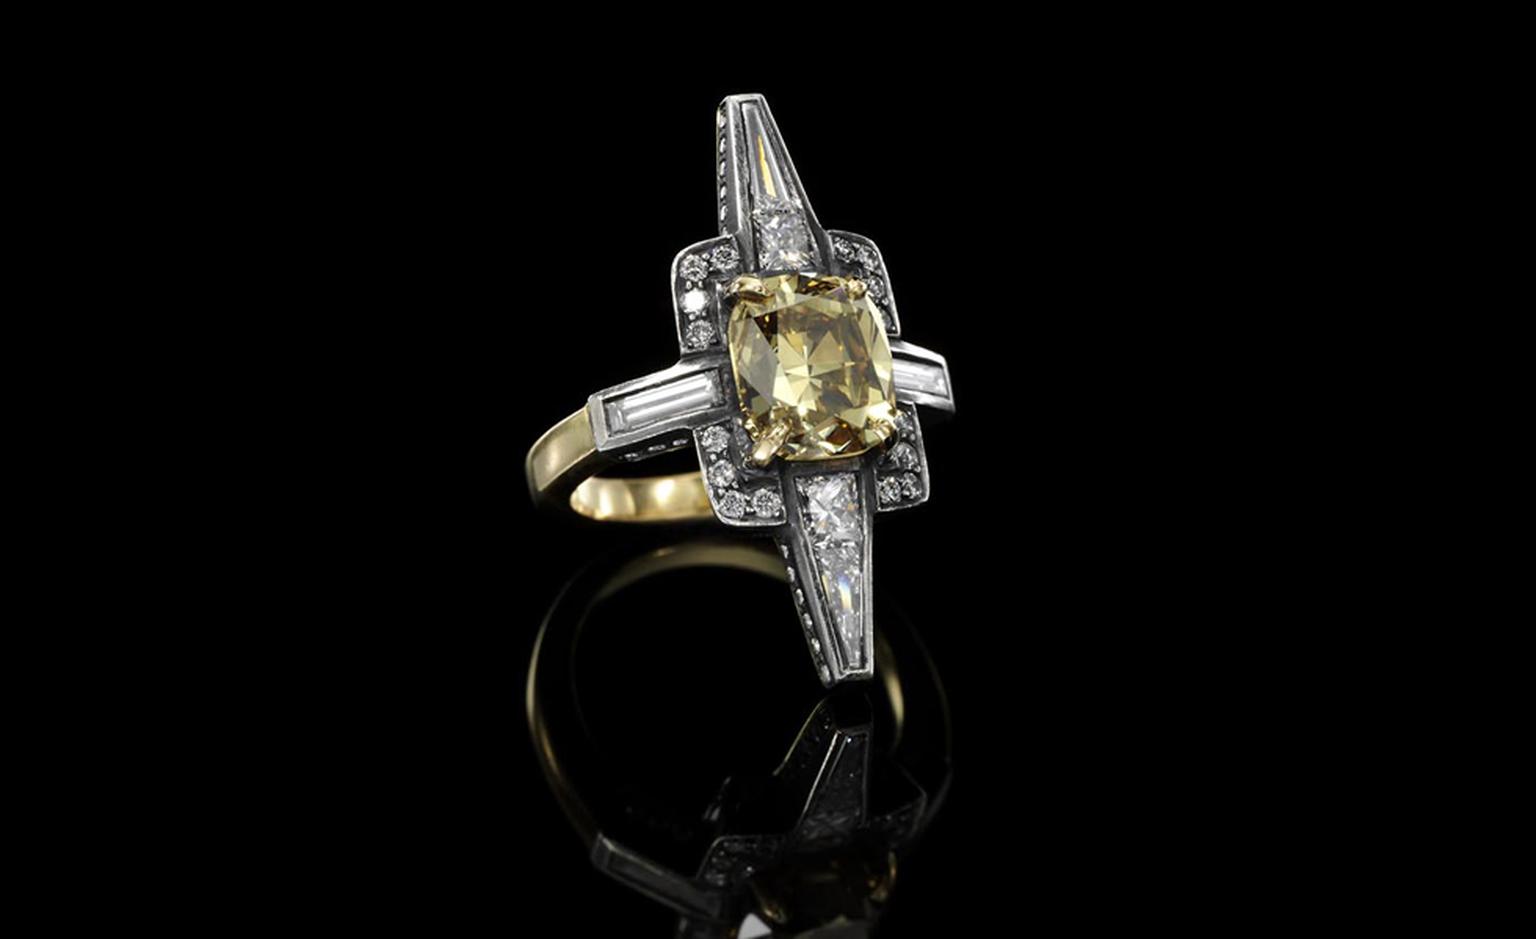 Jessica McCormck, ‘Pride’ diamond, 18k yellow gold and silver ring, from the XIV collection  Set at the centre with a cushion-shaped diamond weighing 3.66 carats of Natural Fancy Deep Brownish Yellow. POA